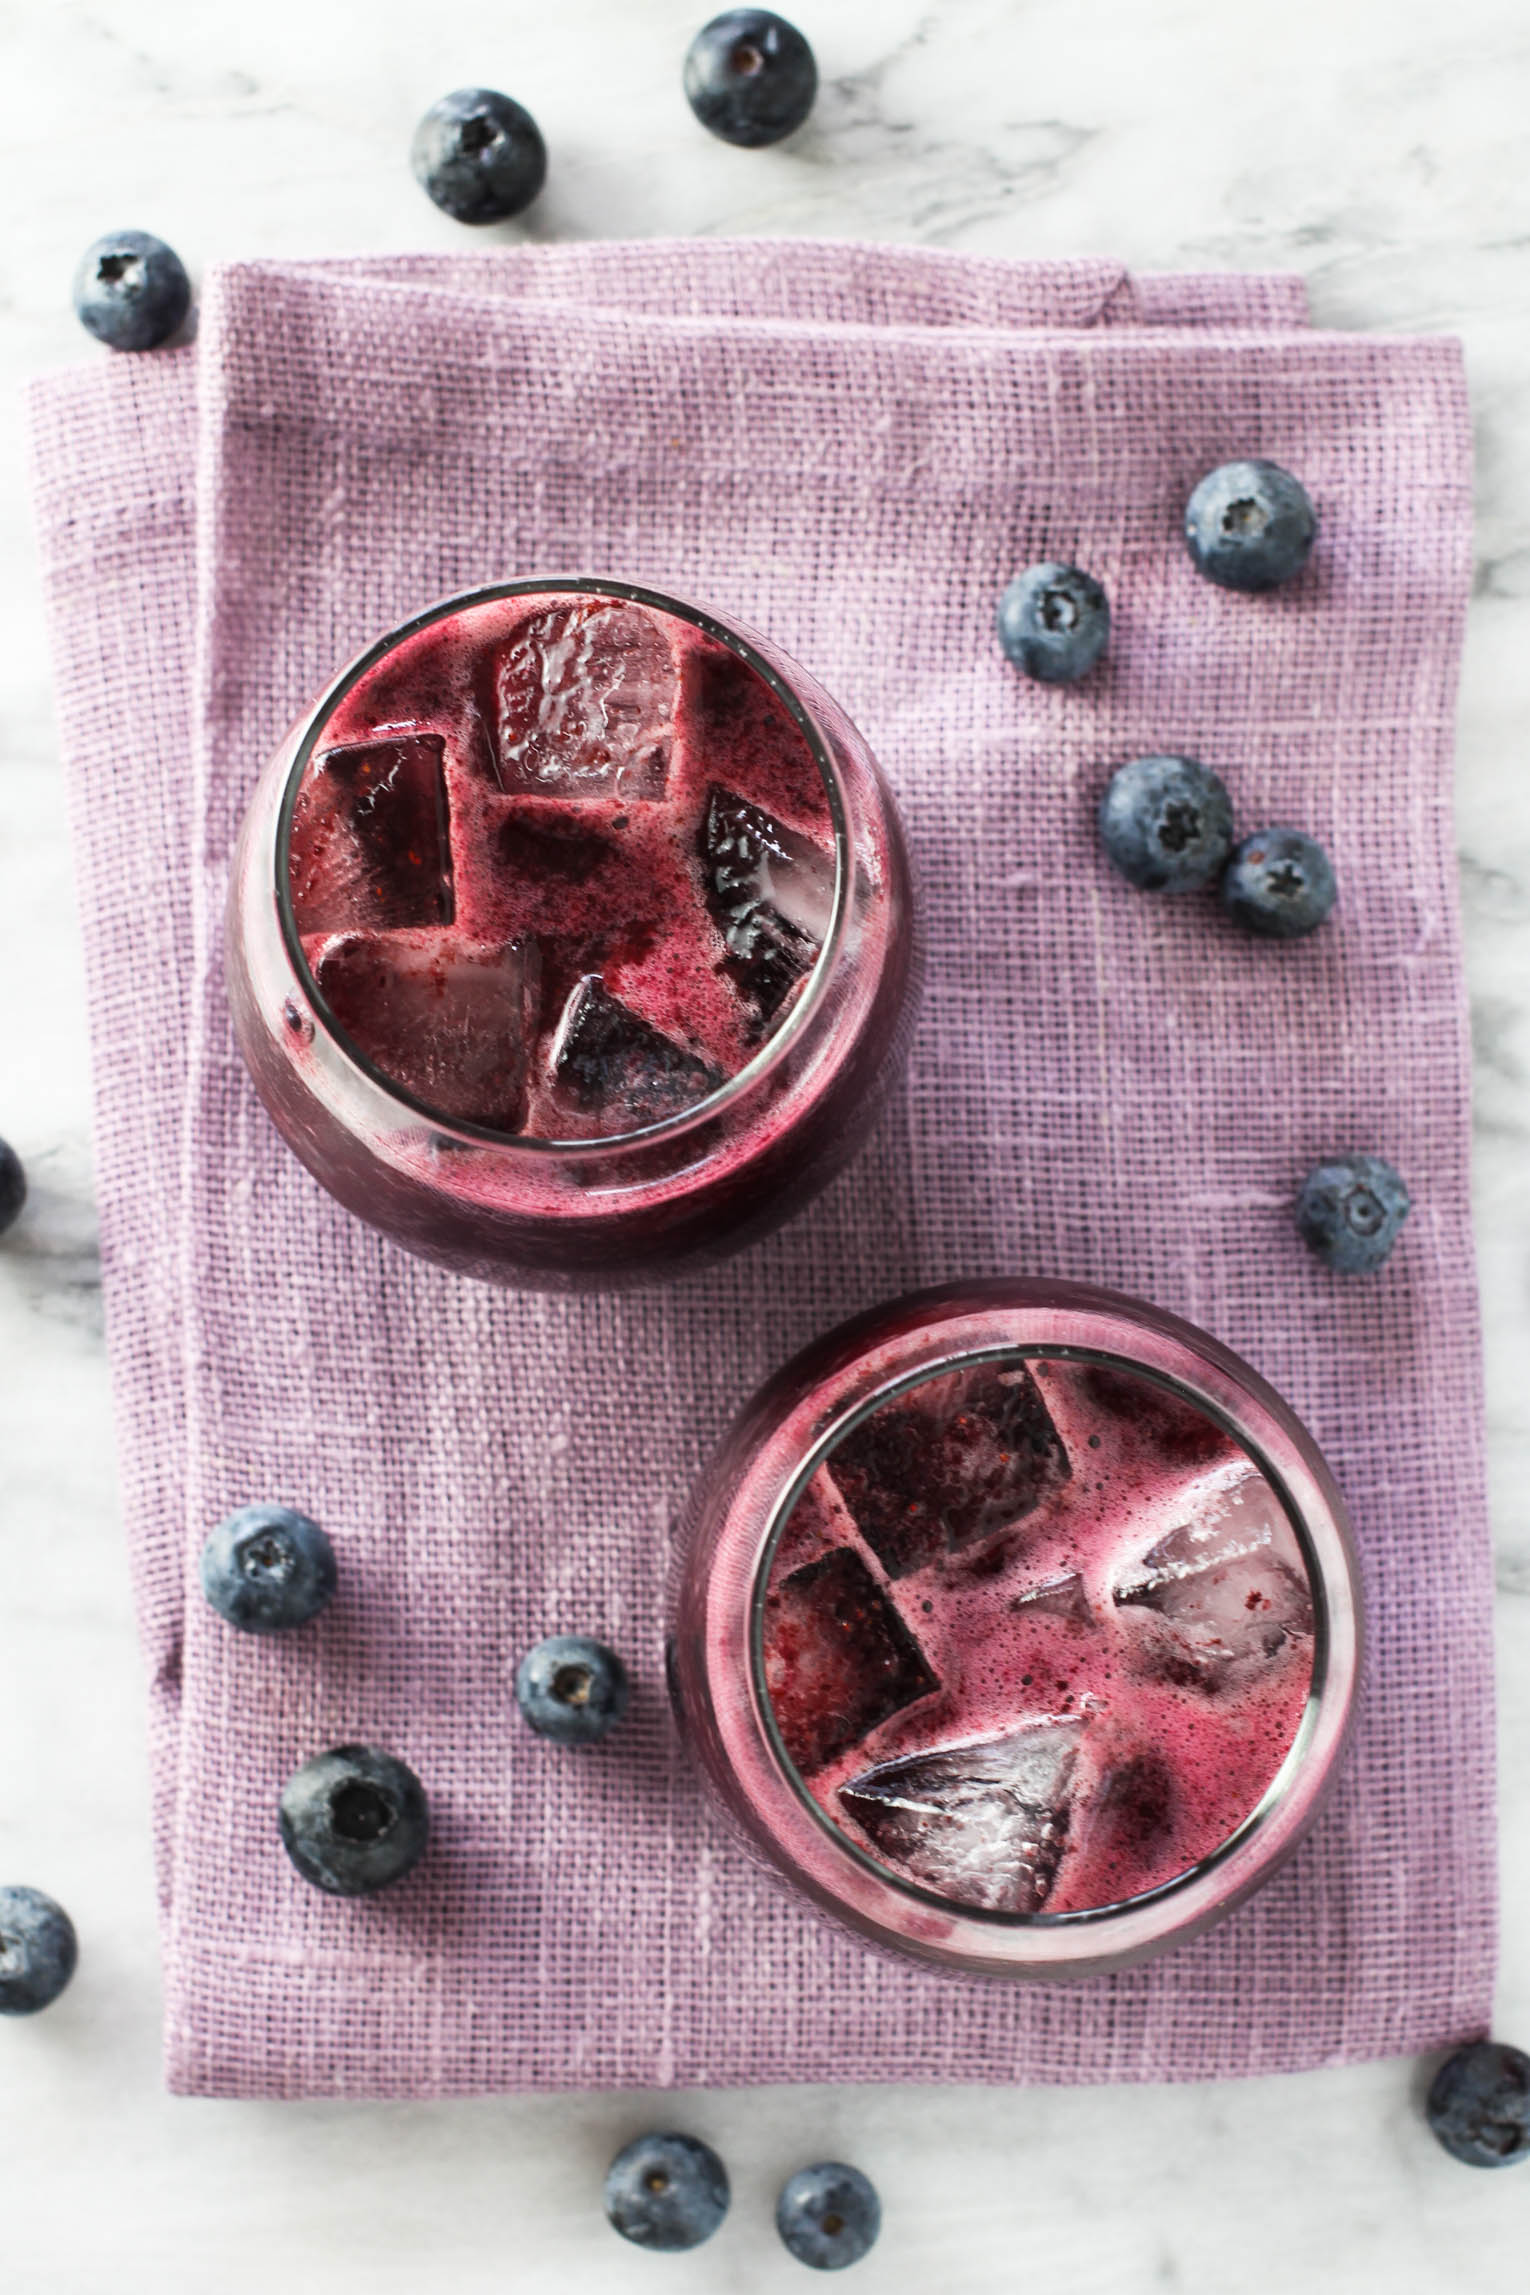 Overhead shot of two glasses with blueberrie juice with ice. The glasses are standing in a purple napkin. There are blueberries scattered around the glasses.